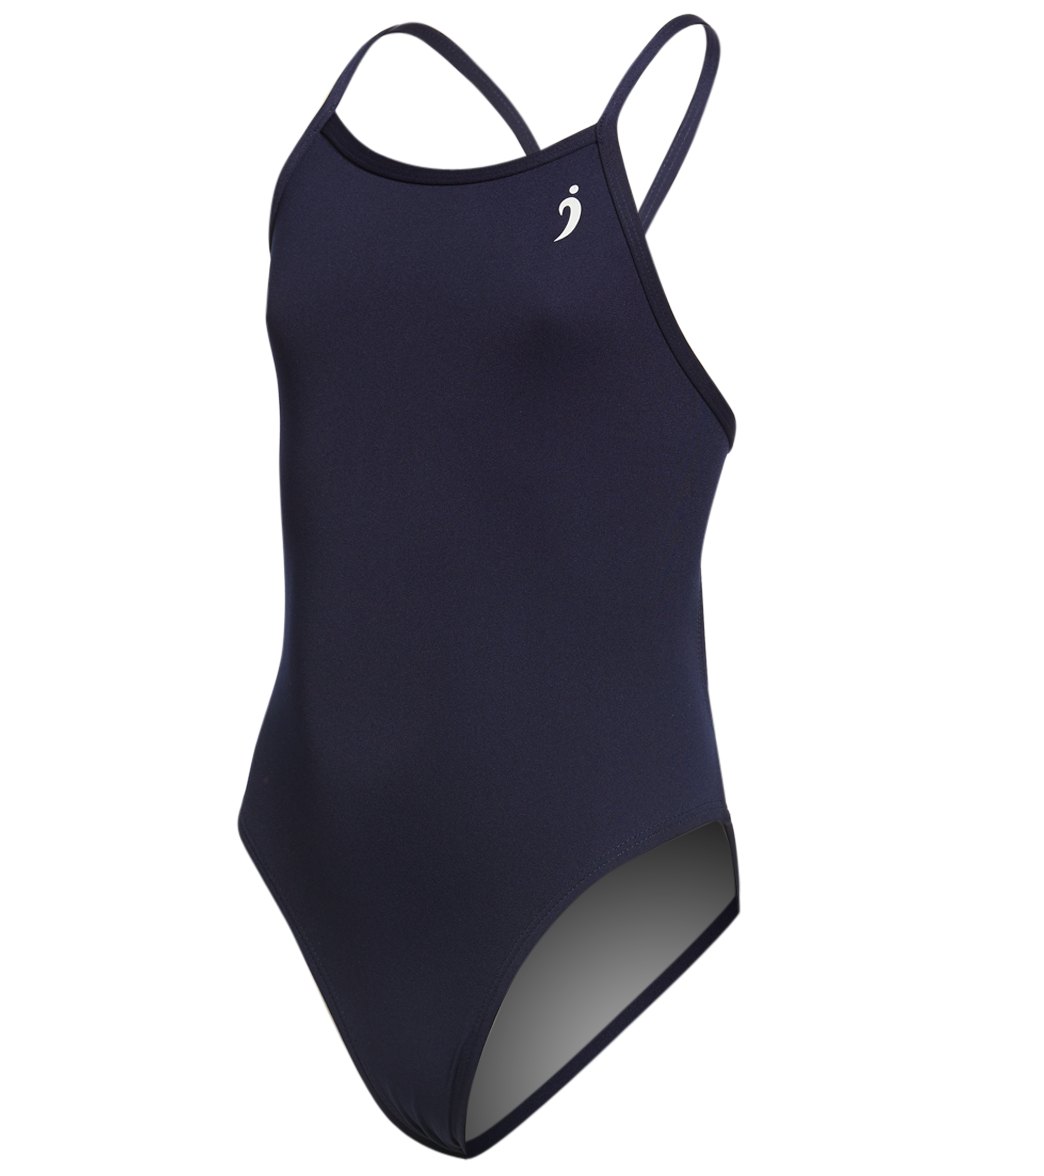 Illusions Activewear Girls' Max Navy Thin Strap One Piece Swimsuit - 22 Polyester - Swimoutlet.com